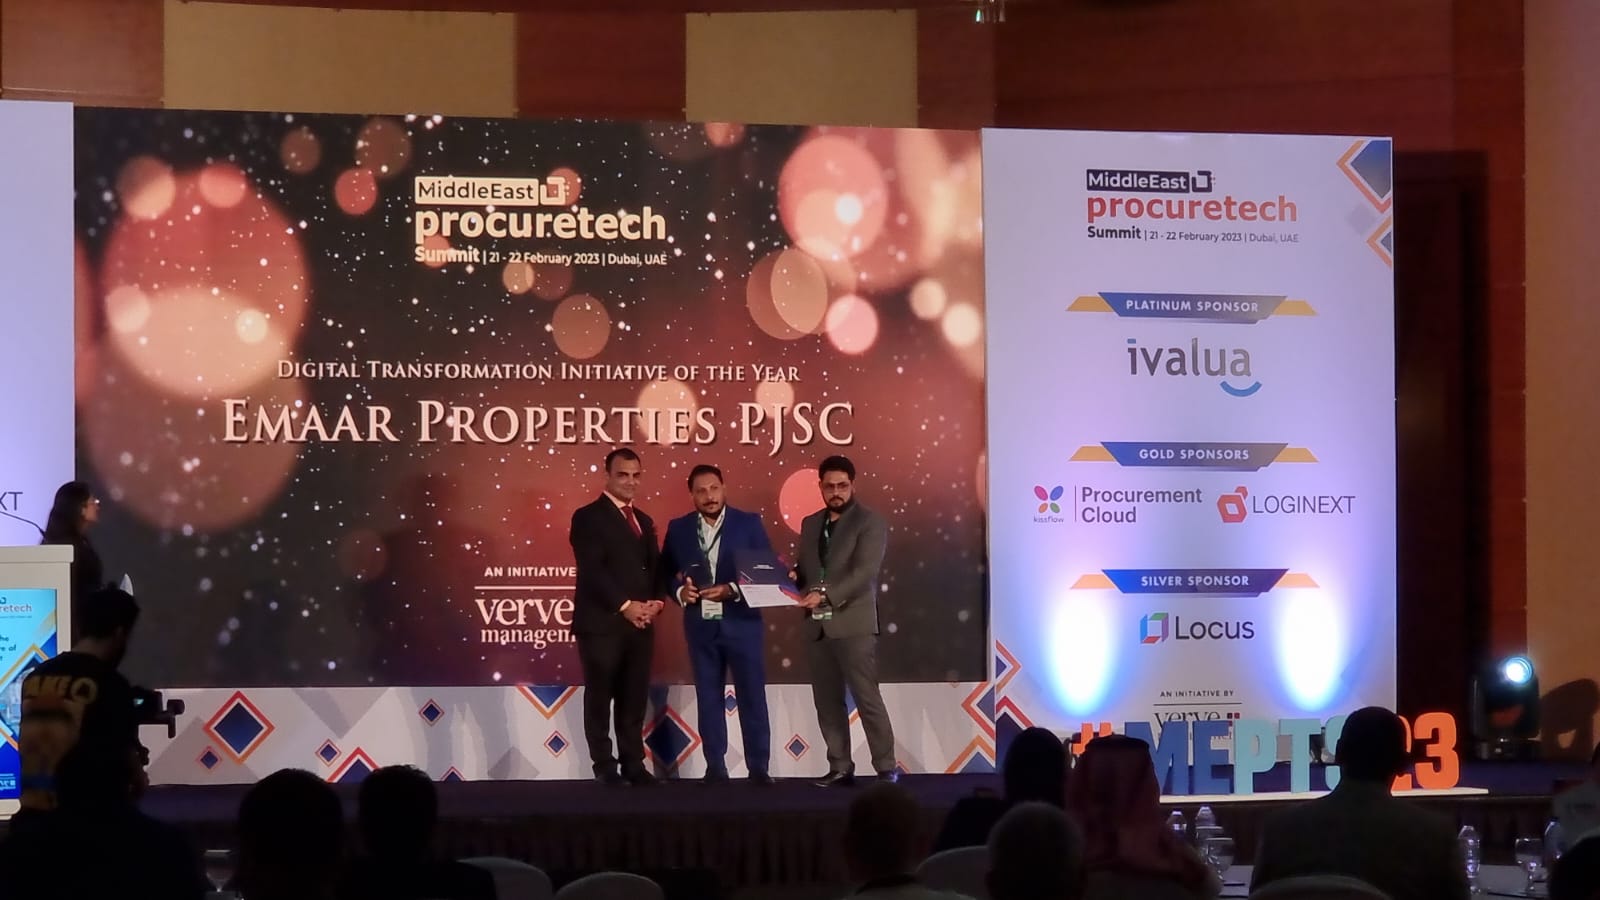 Emaar Properties Wins 2023 ‘Digital Transformation of the Year’ Award at Middle East Procuretech Summit